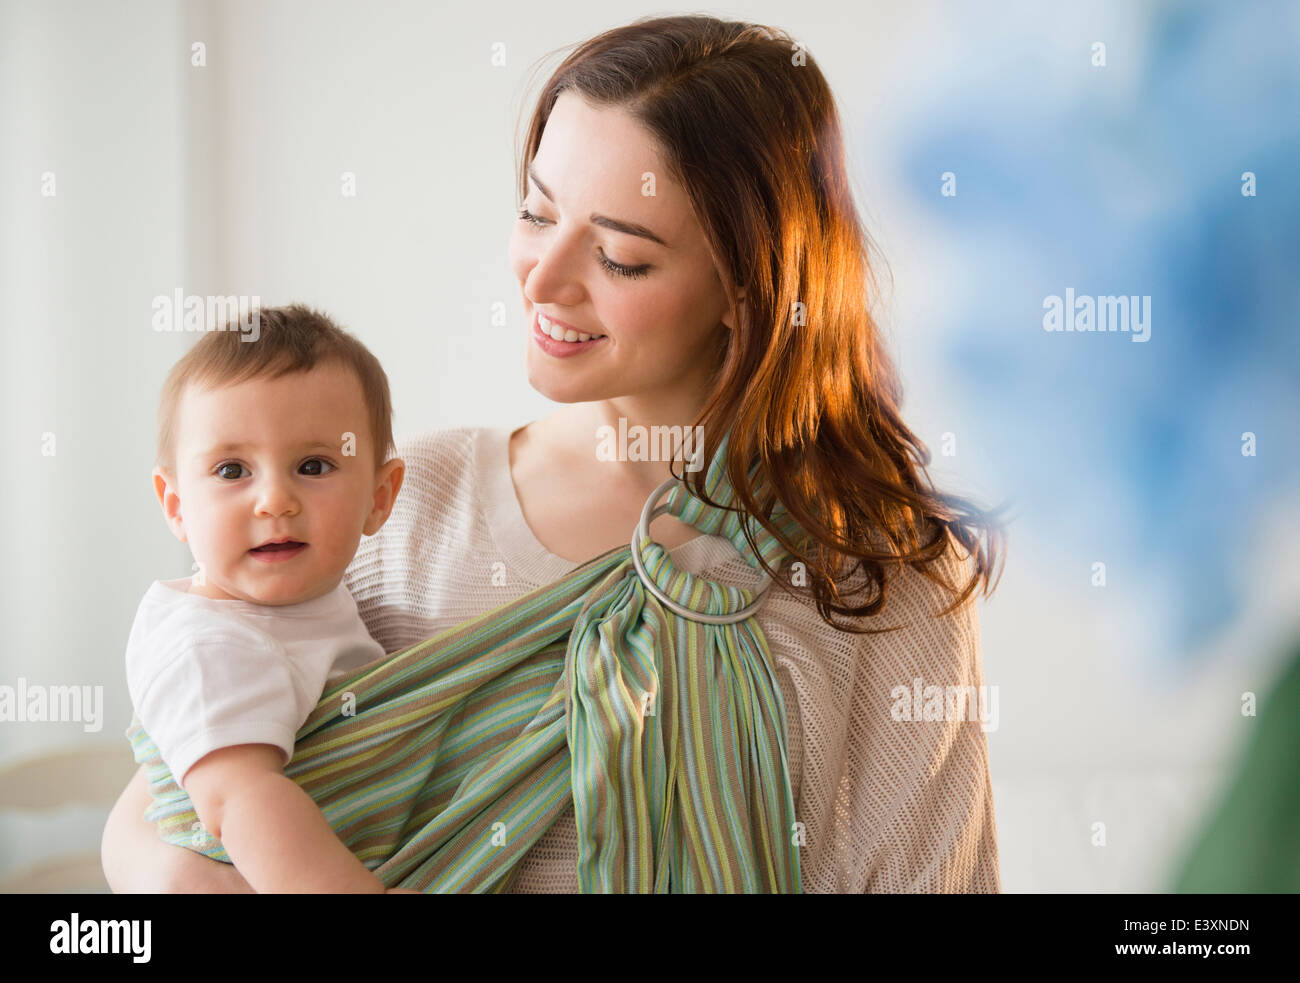 Mother carrying baby in sling Stock Photo